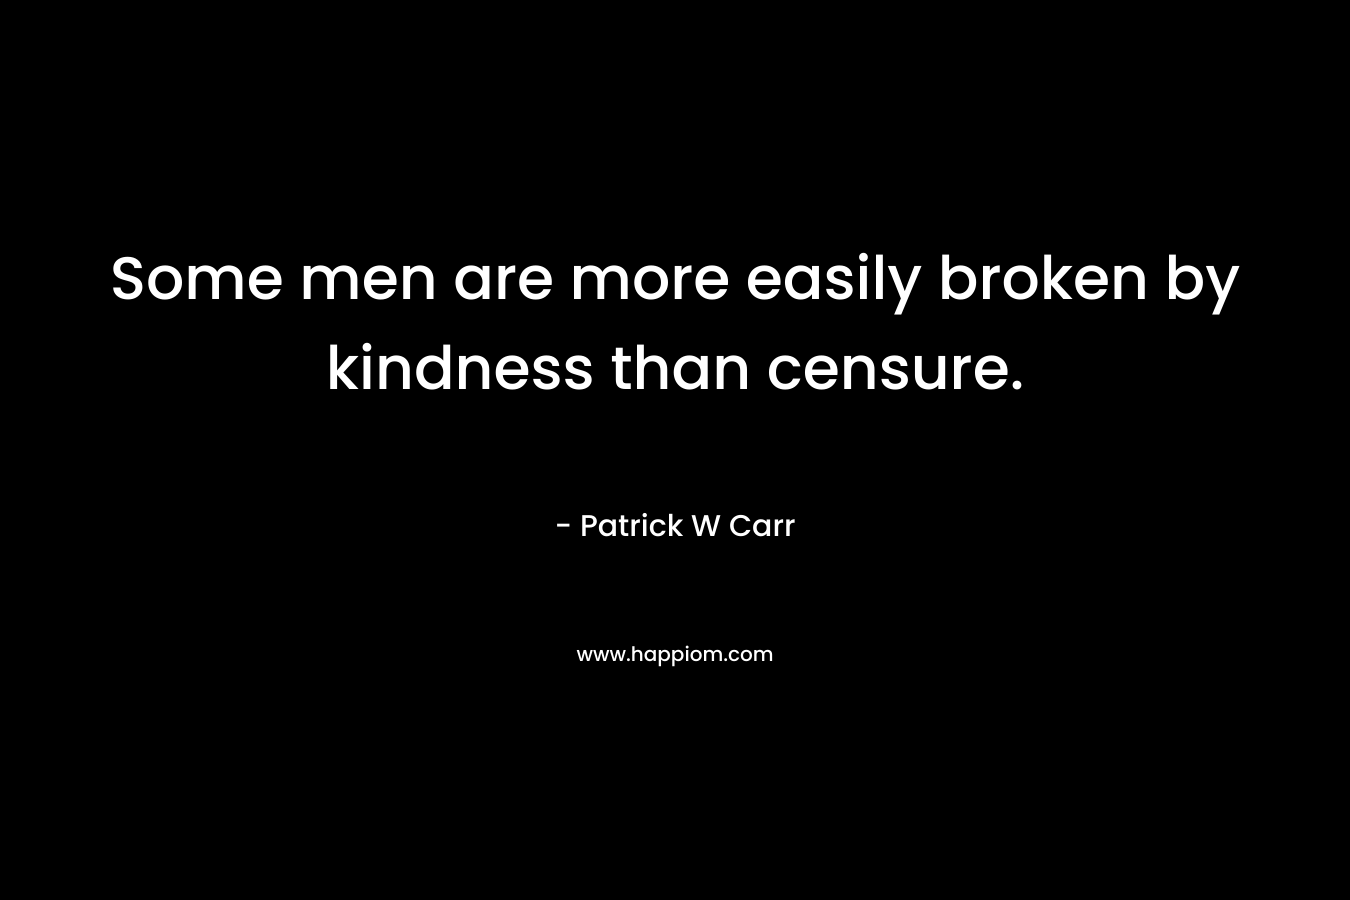 Some men are more easily broken by kindness than censure. – Patrick W Carr